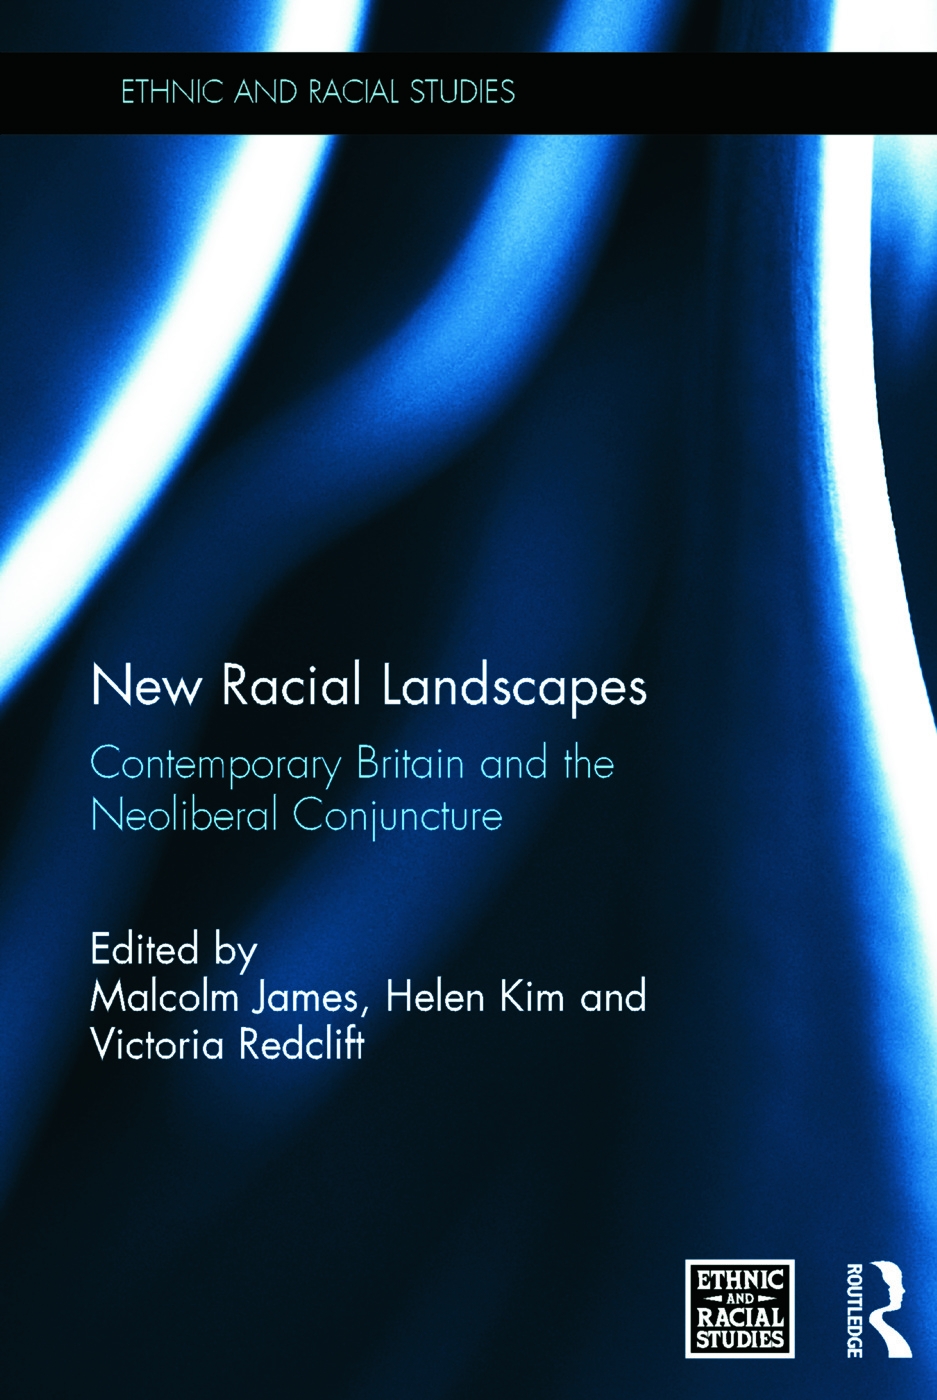 New Racial Landscapes: Contemporary Britain and the Neoliberal Conjuncture